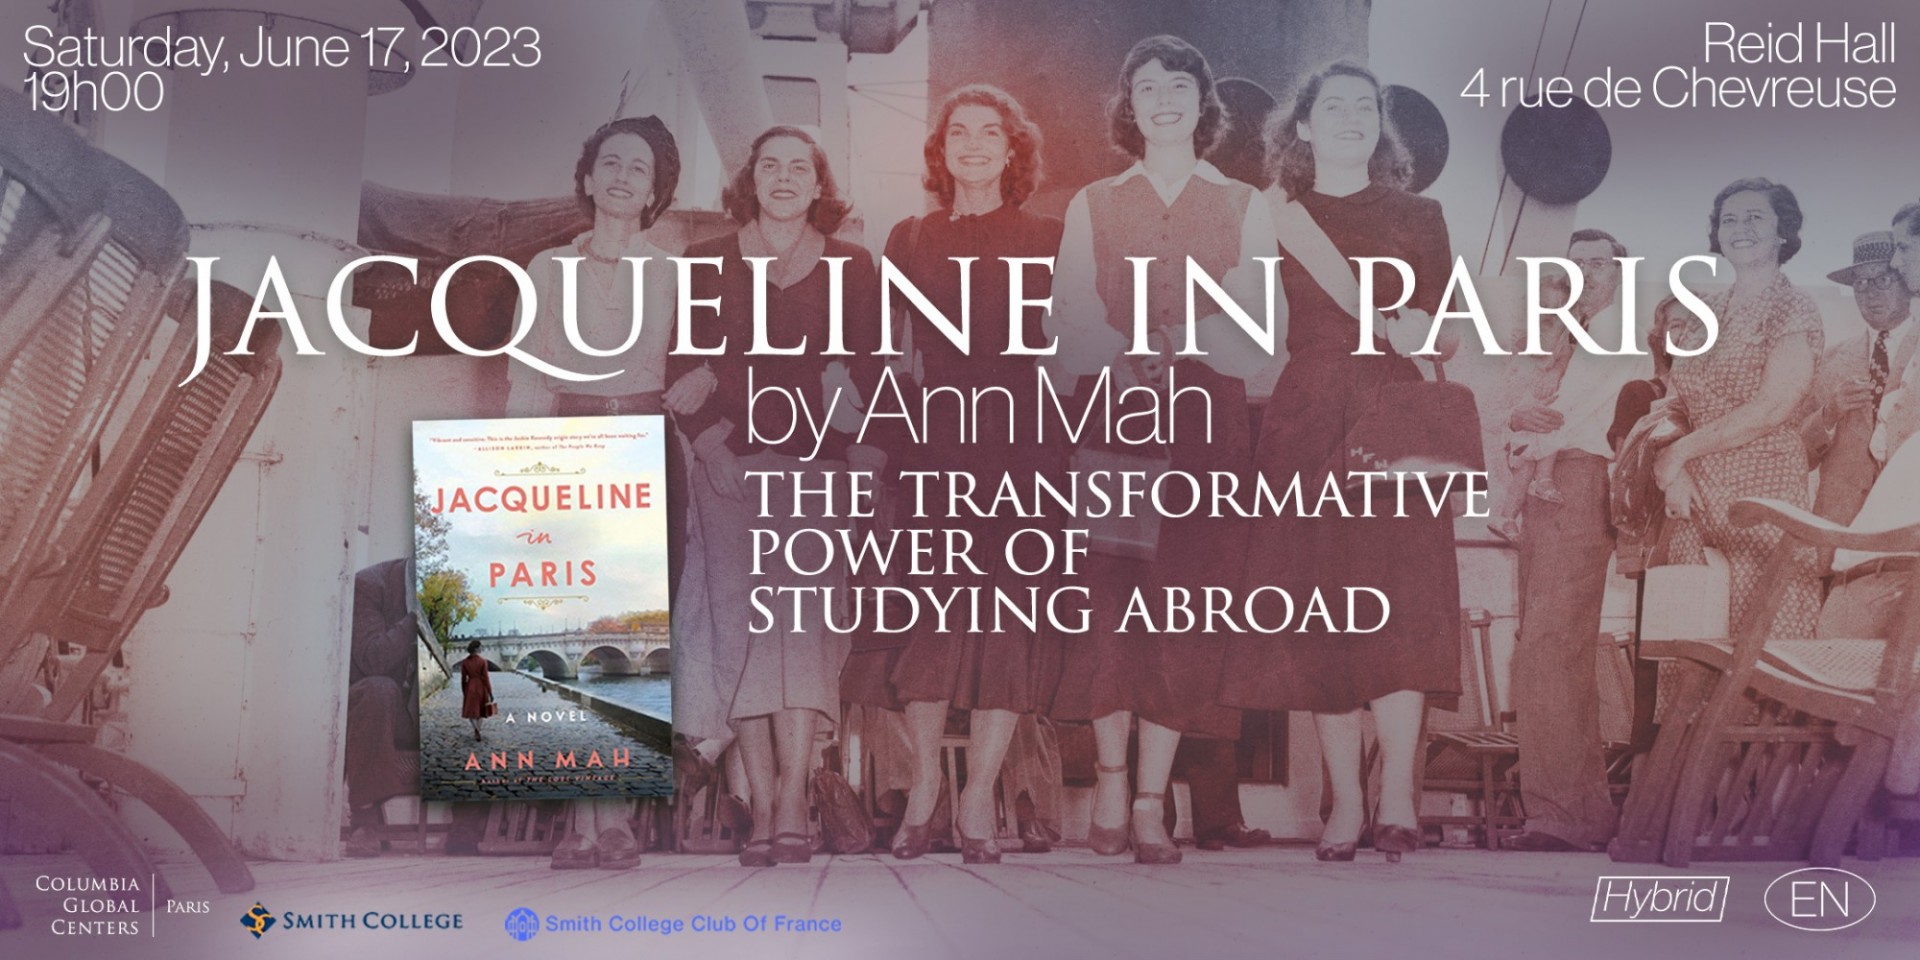 Jacqueline in Paris by Ann Mah: The Transformative Power of Studying Abroad